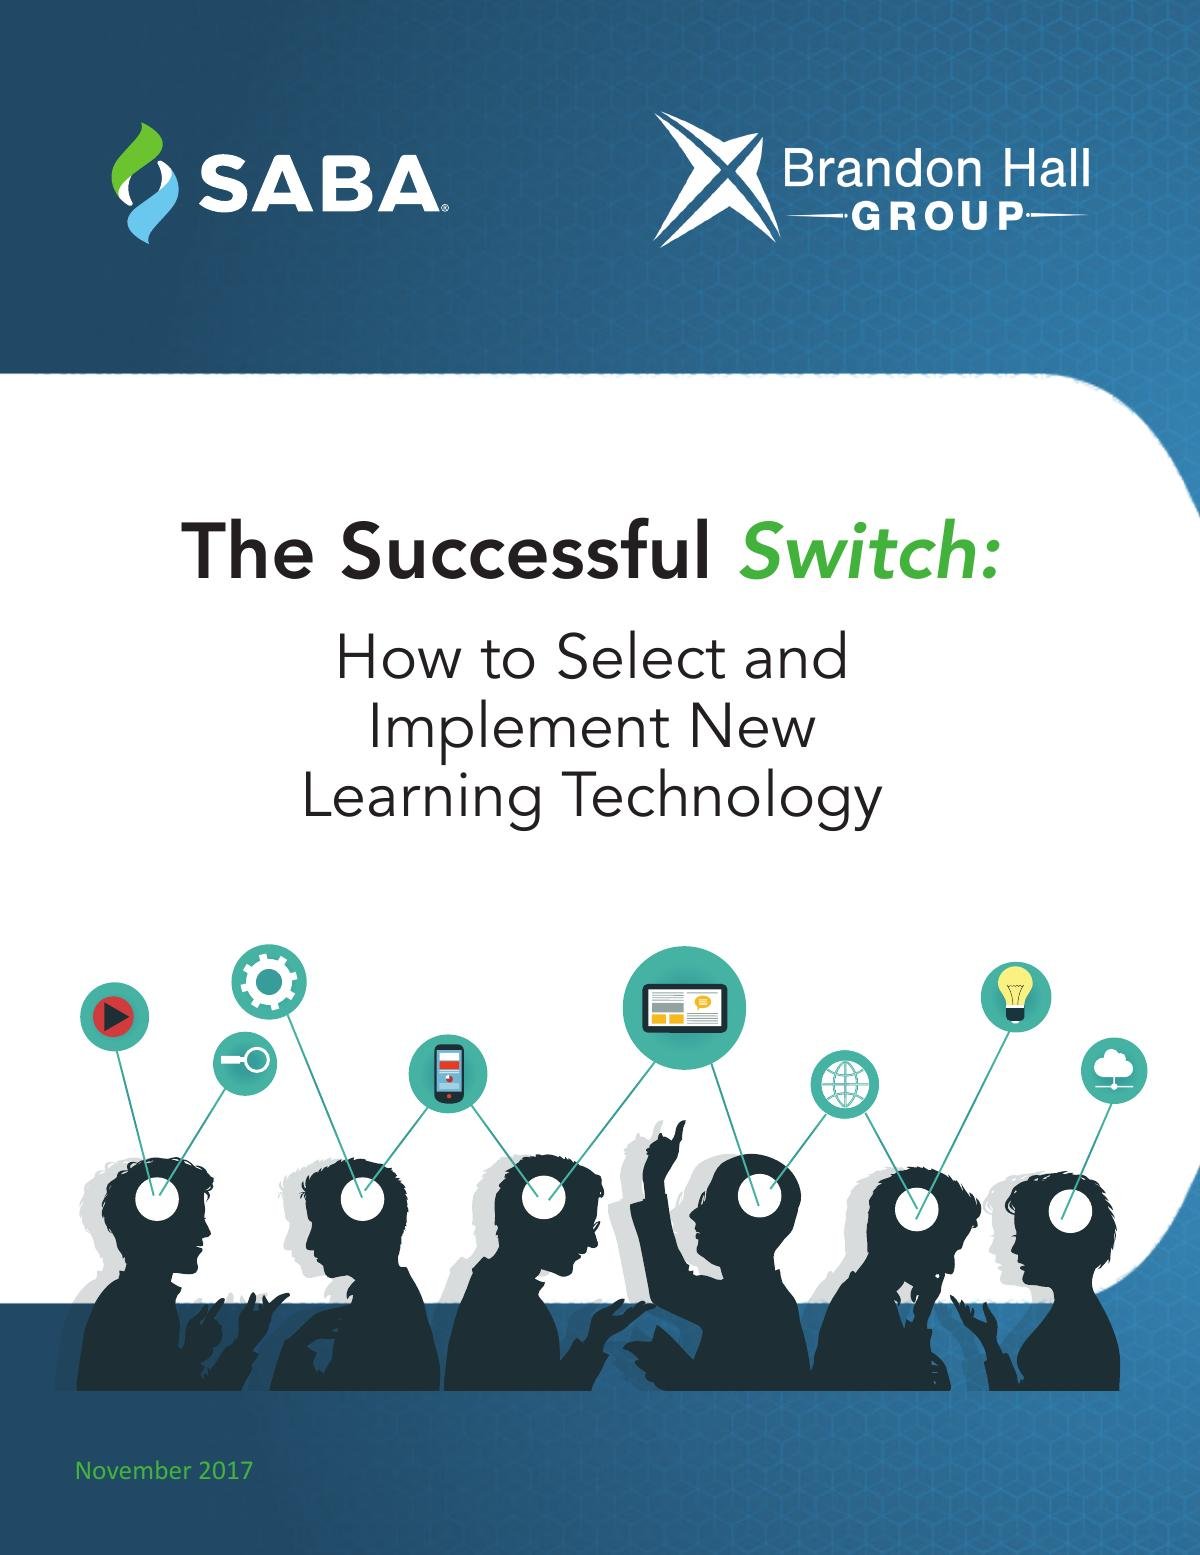 The Successful Switch: How to Select and Implement New Learning Technology